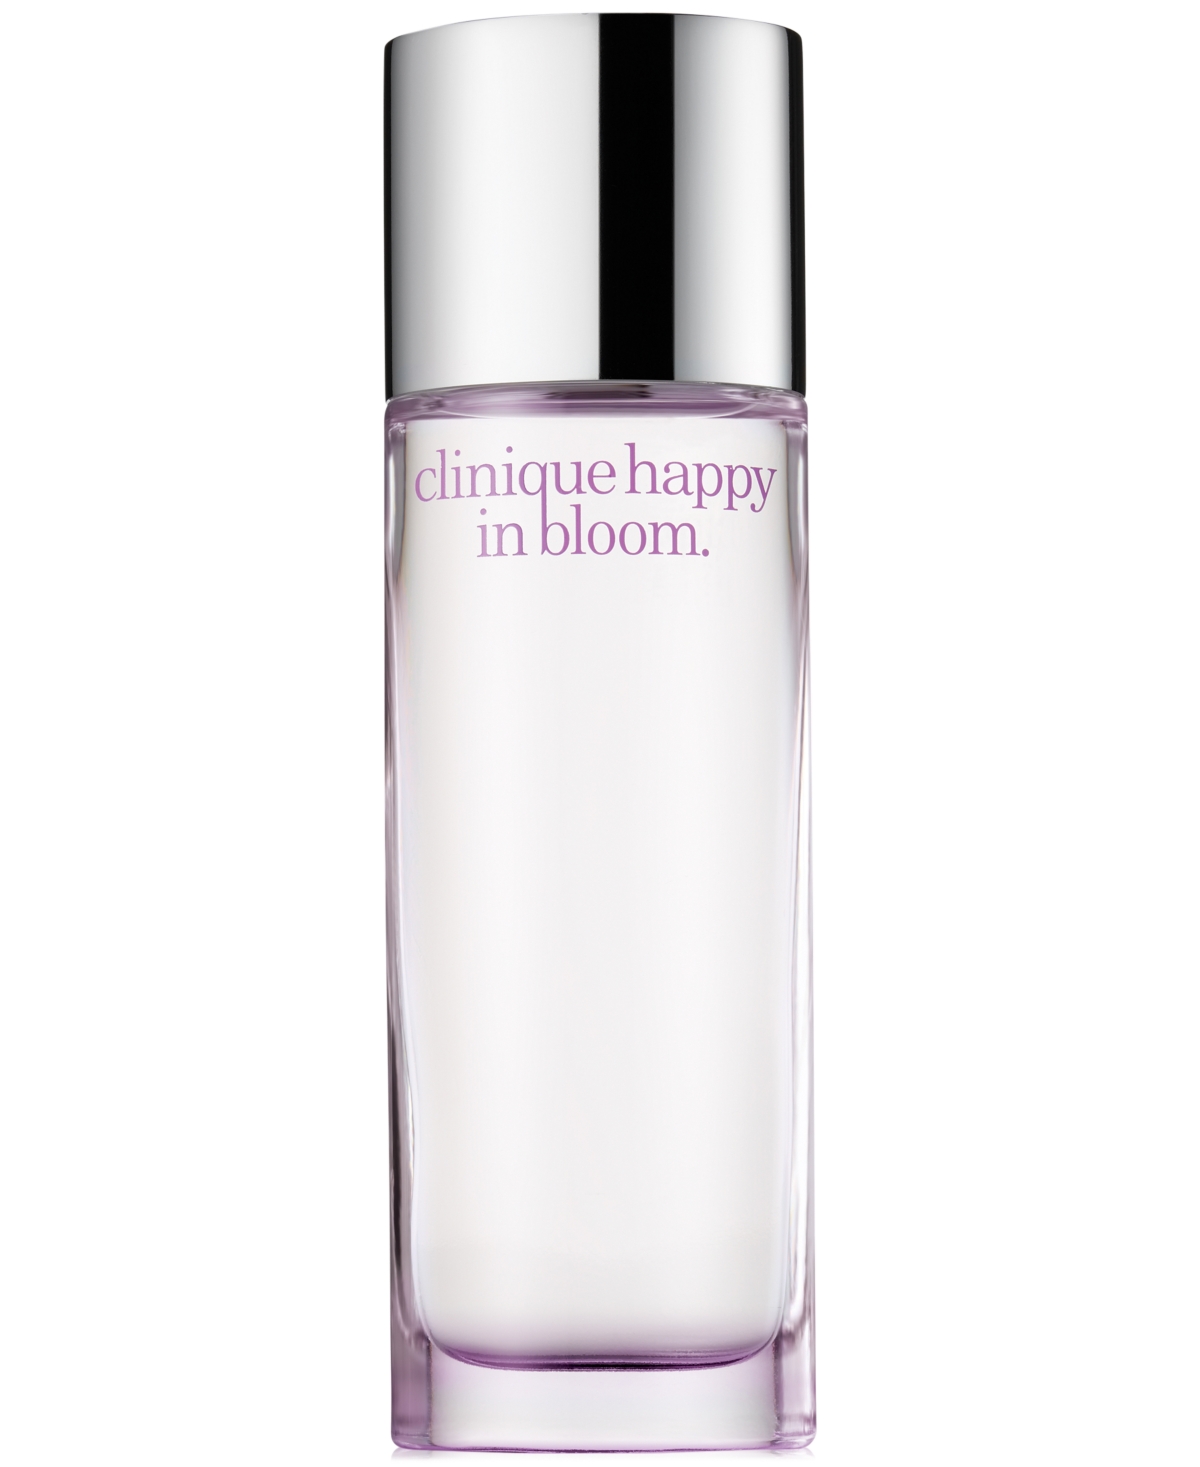 Clinique Happy In Bloom Perfume 1.7-oz. & Reviews - Perfume - Beauty - Macy's